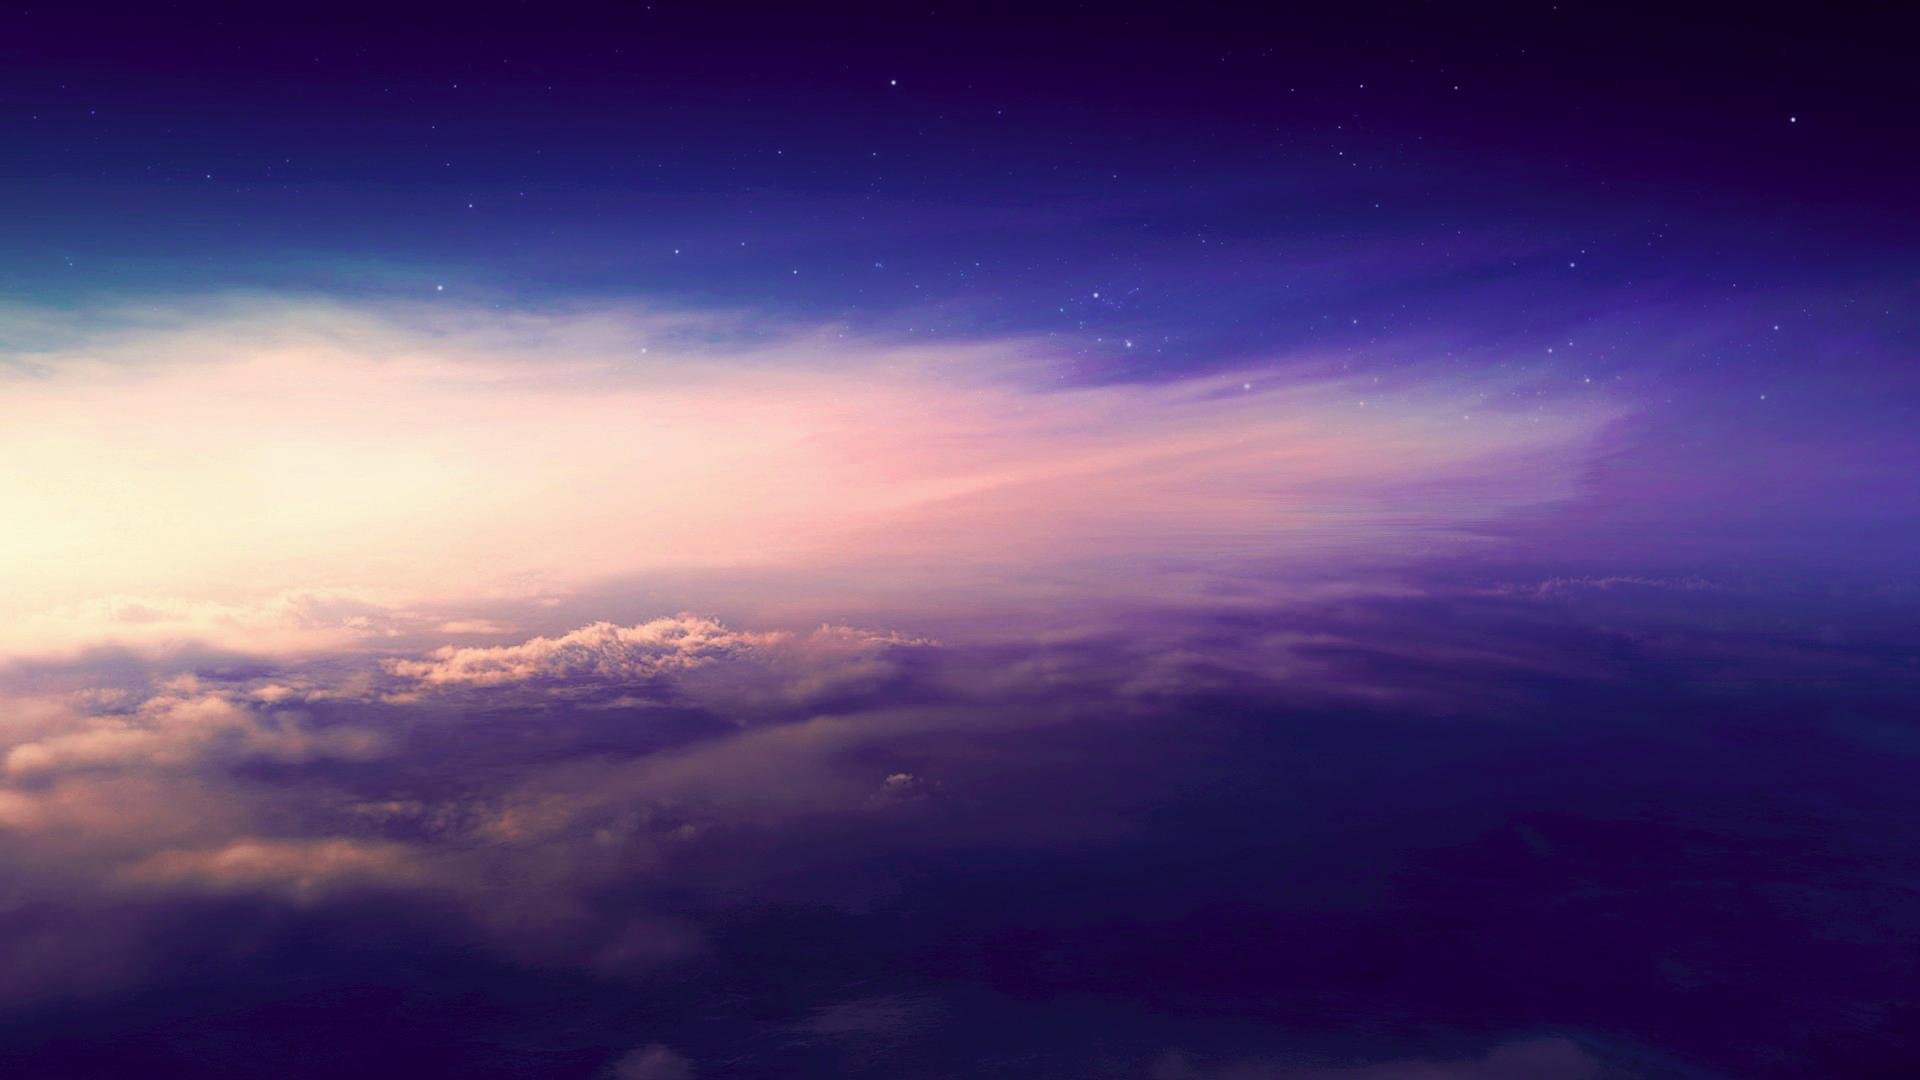 Stratosphere 4K wallpaper for your desktop or mobile screen free and easy to download